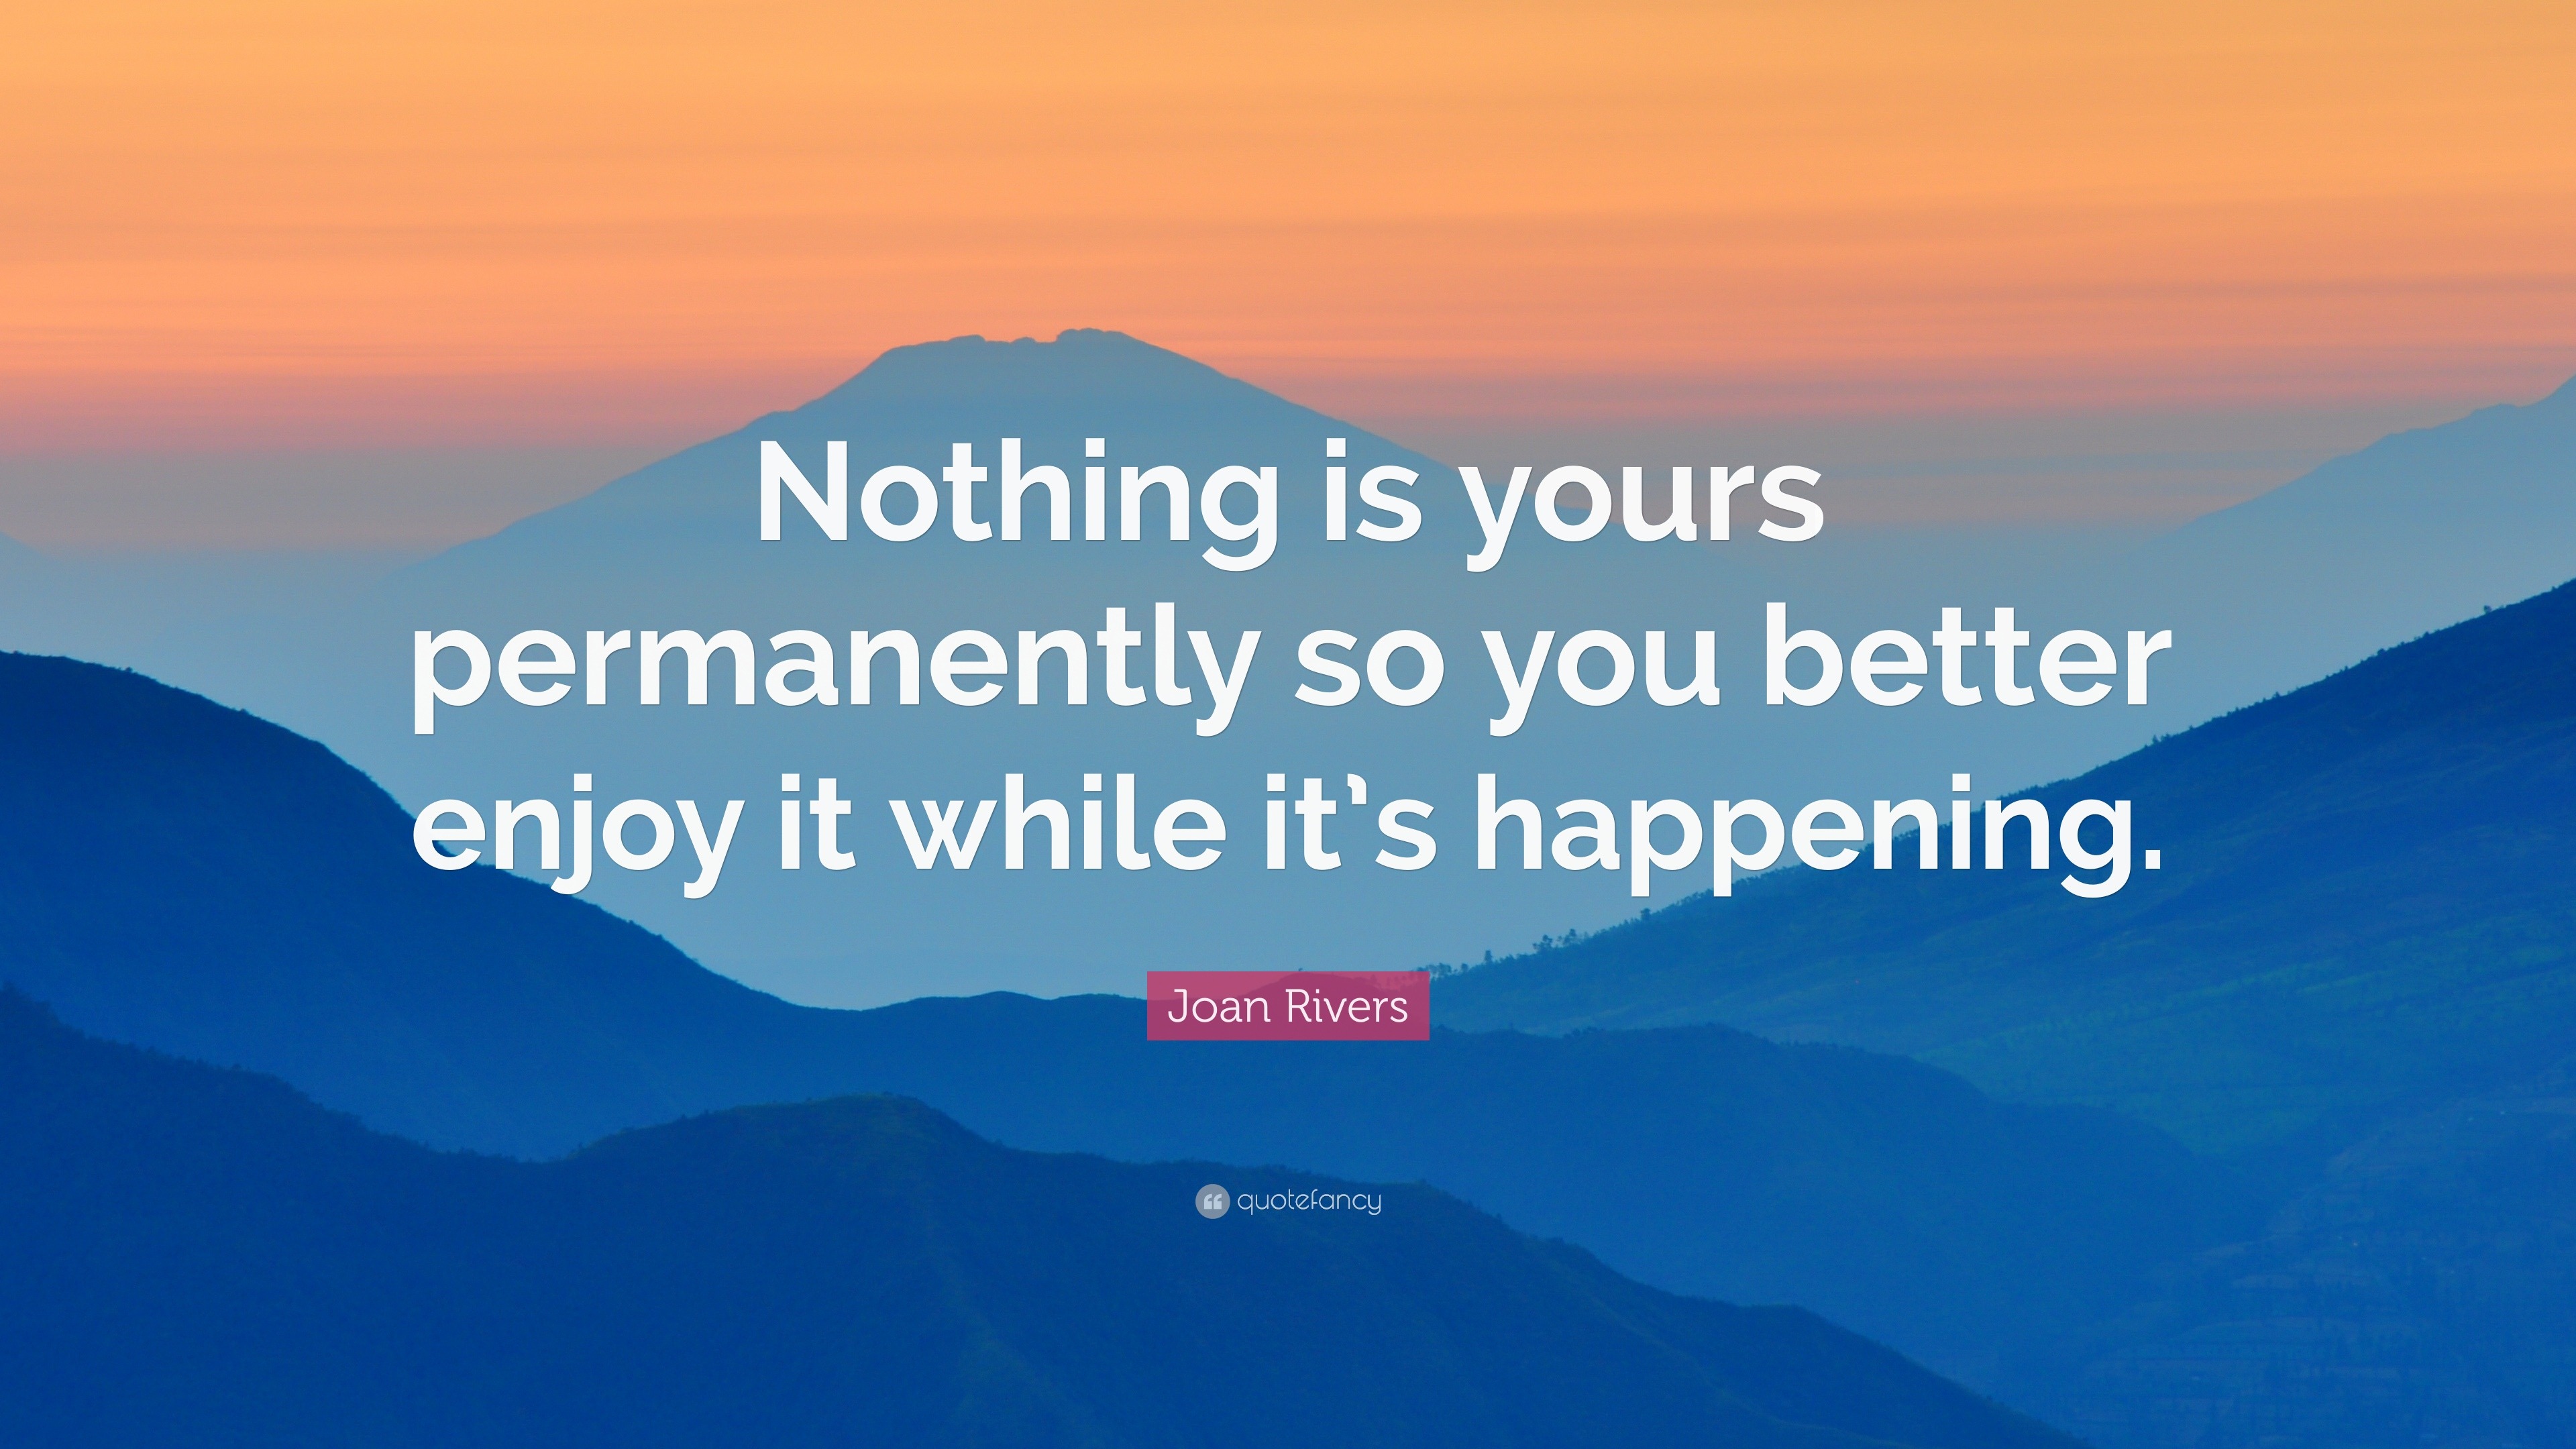 Joan Rivers Quote: “Nothing is yours permanently so you better enjoy it ...